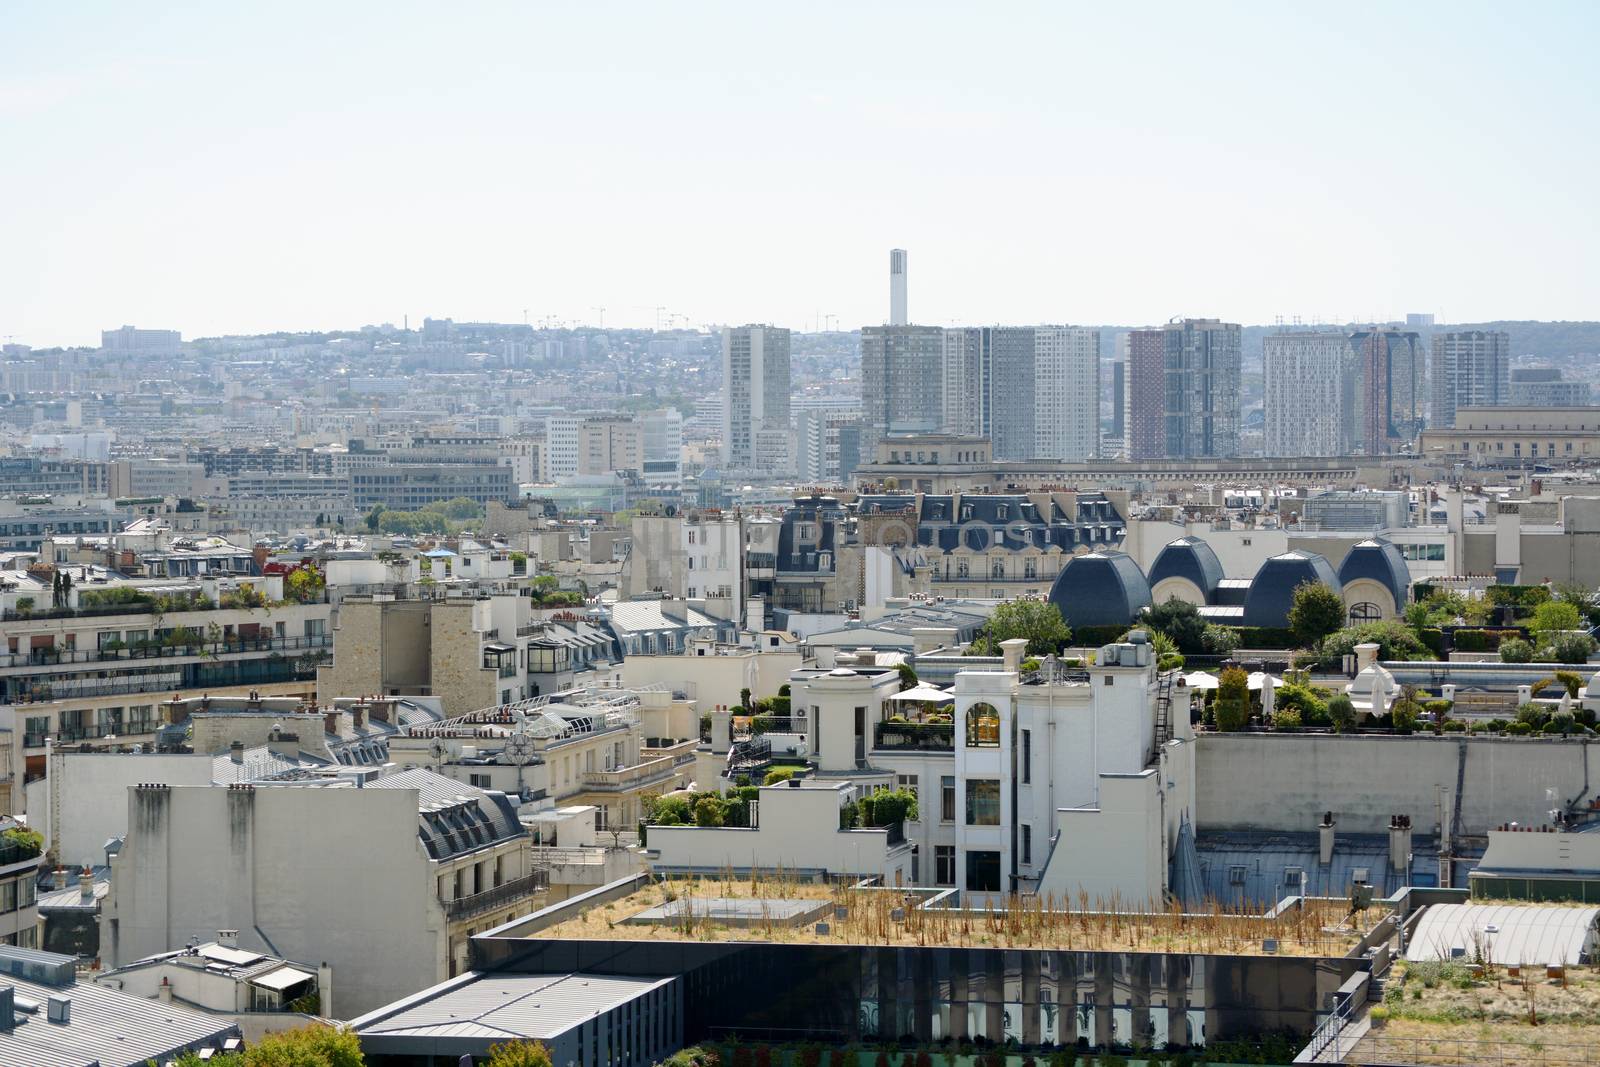 Paris cityscape with roof gardens with high-rise buildings and apartments beyond in the densely built French city